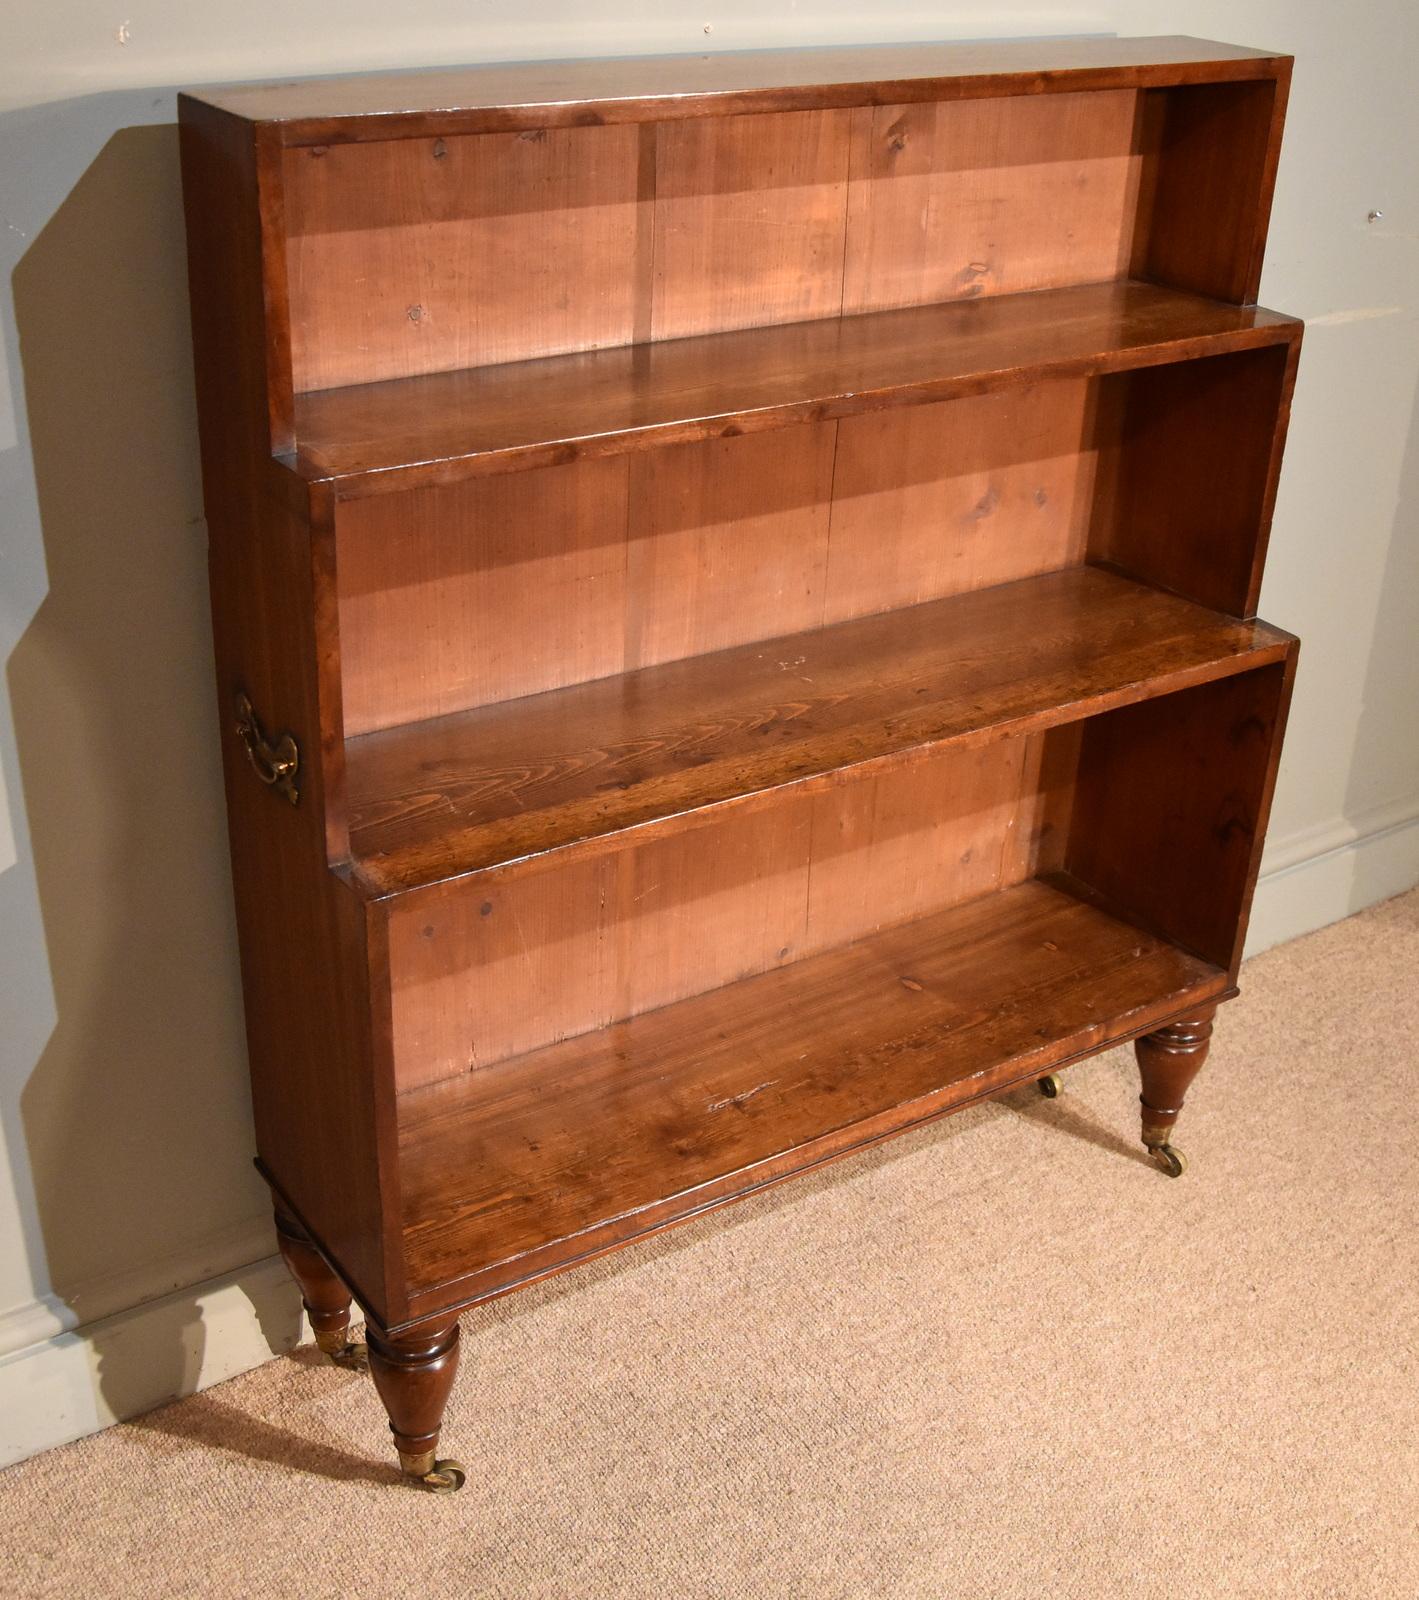 A fine regency period campaign waterfall bookcase. The legs unscrew for transportation

Measures: Height 42.5